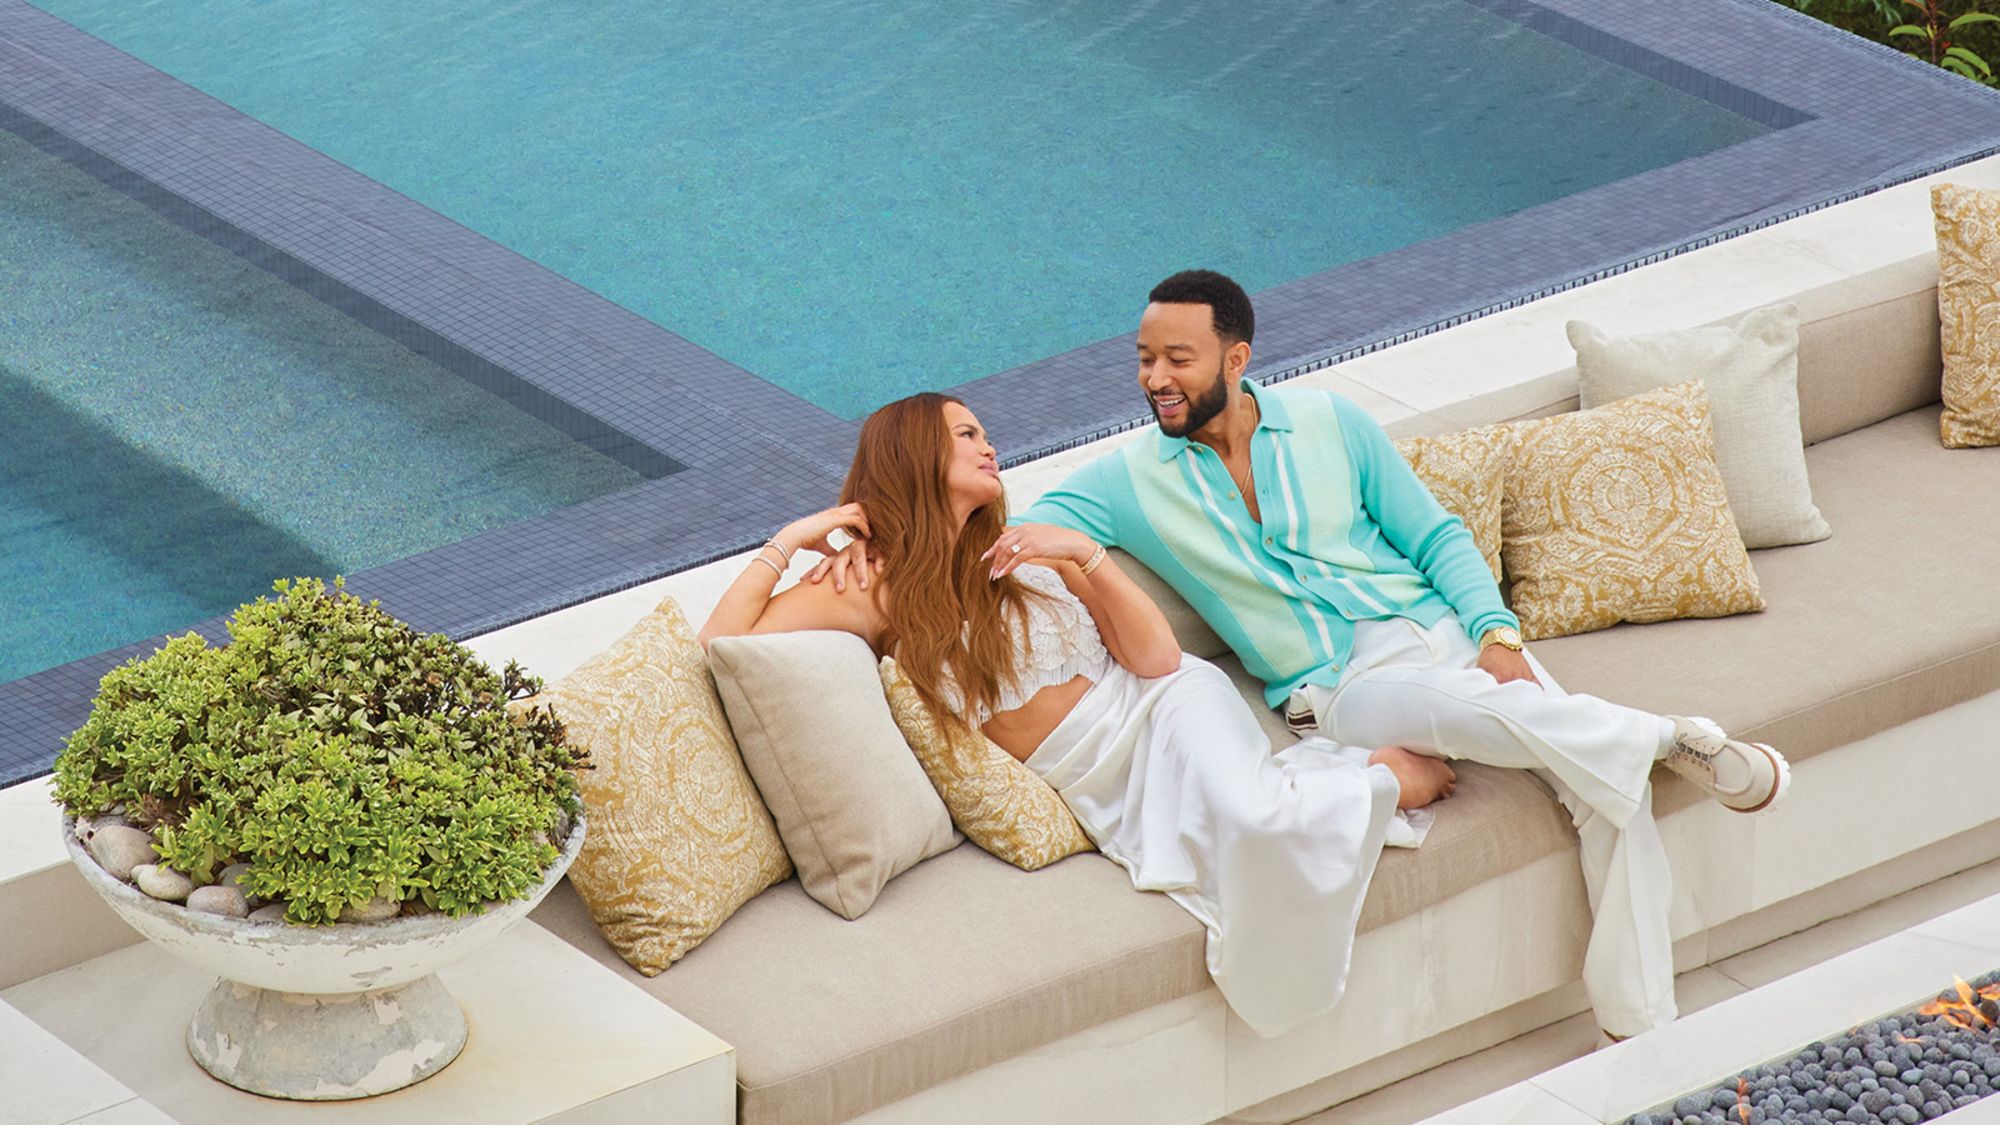 Chrissy Teigen and John Legend poolside at their new Beverly Hills property.